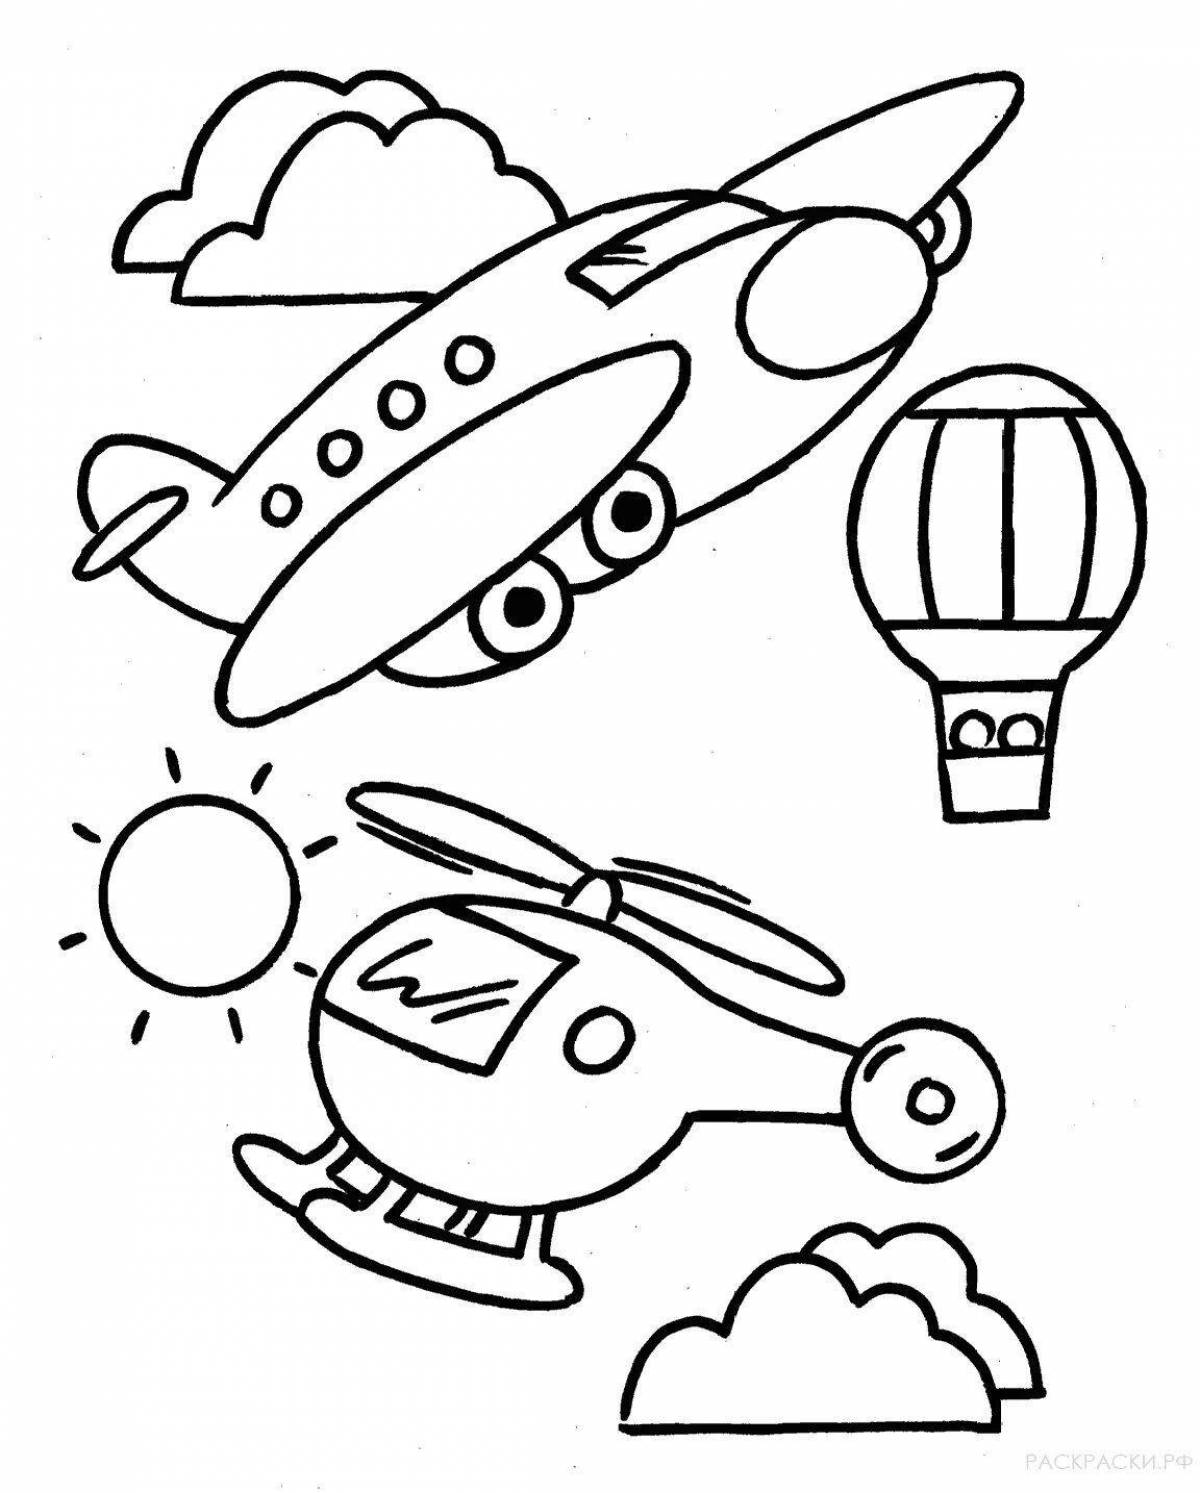 Amazing airplane coloring book for 5-6 year olds